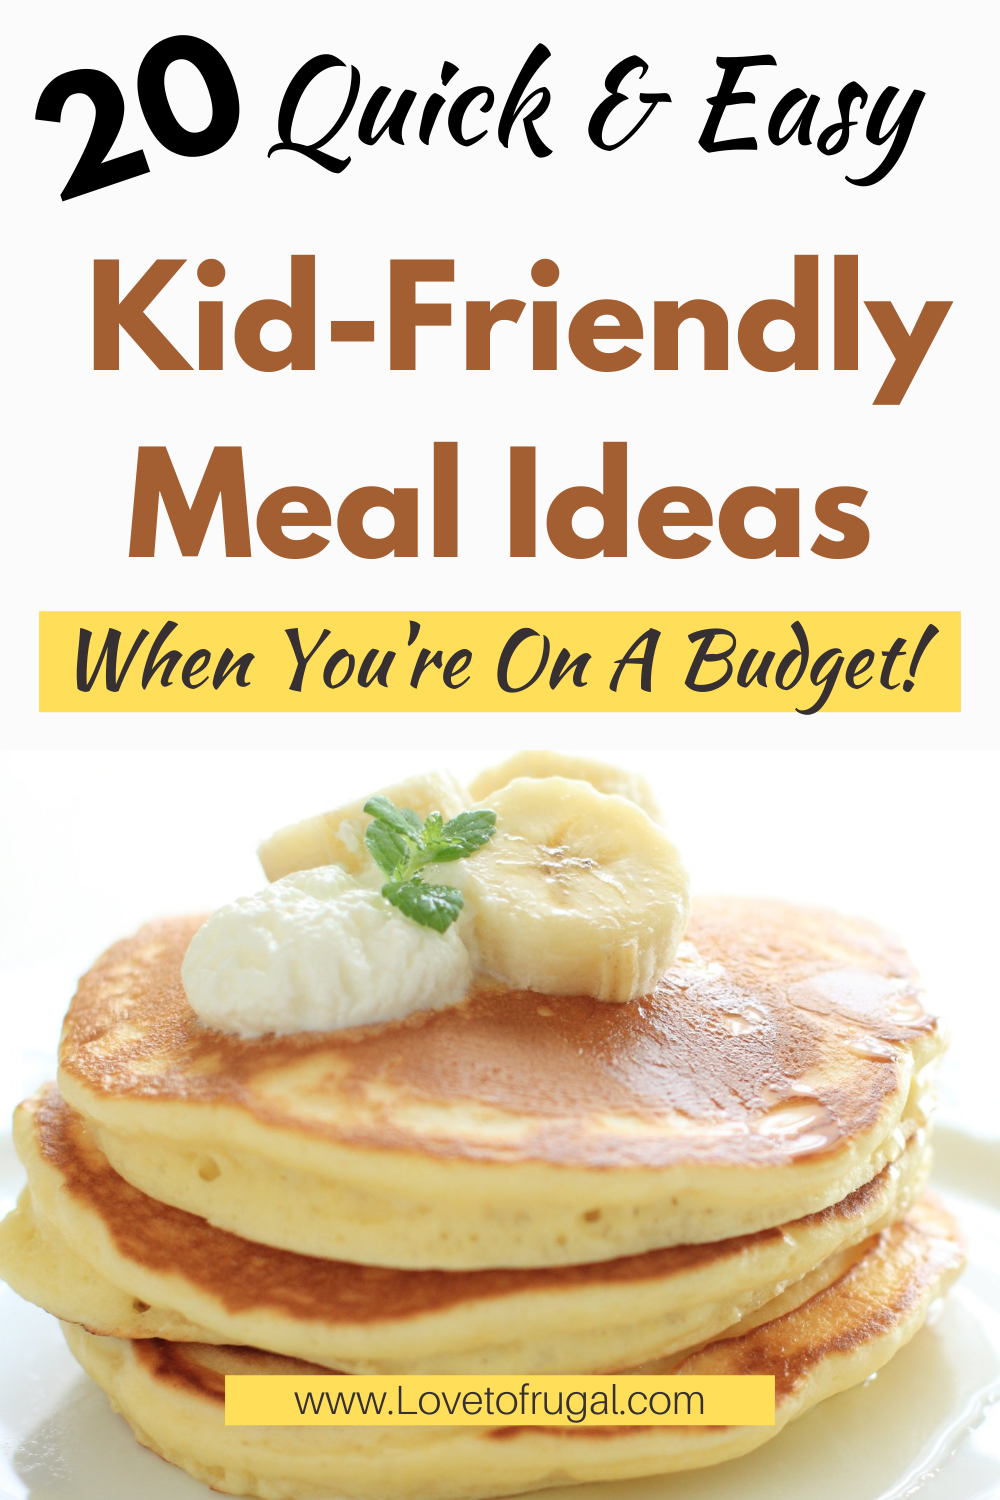 quick & easy frugal meal ideas